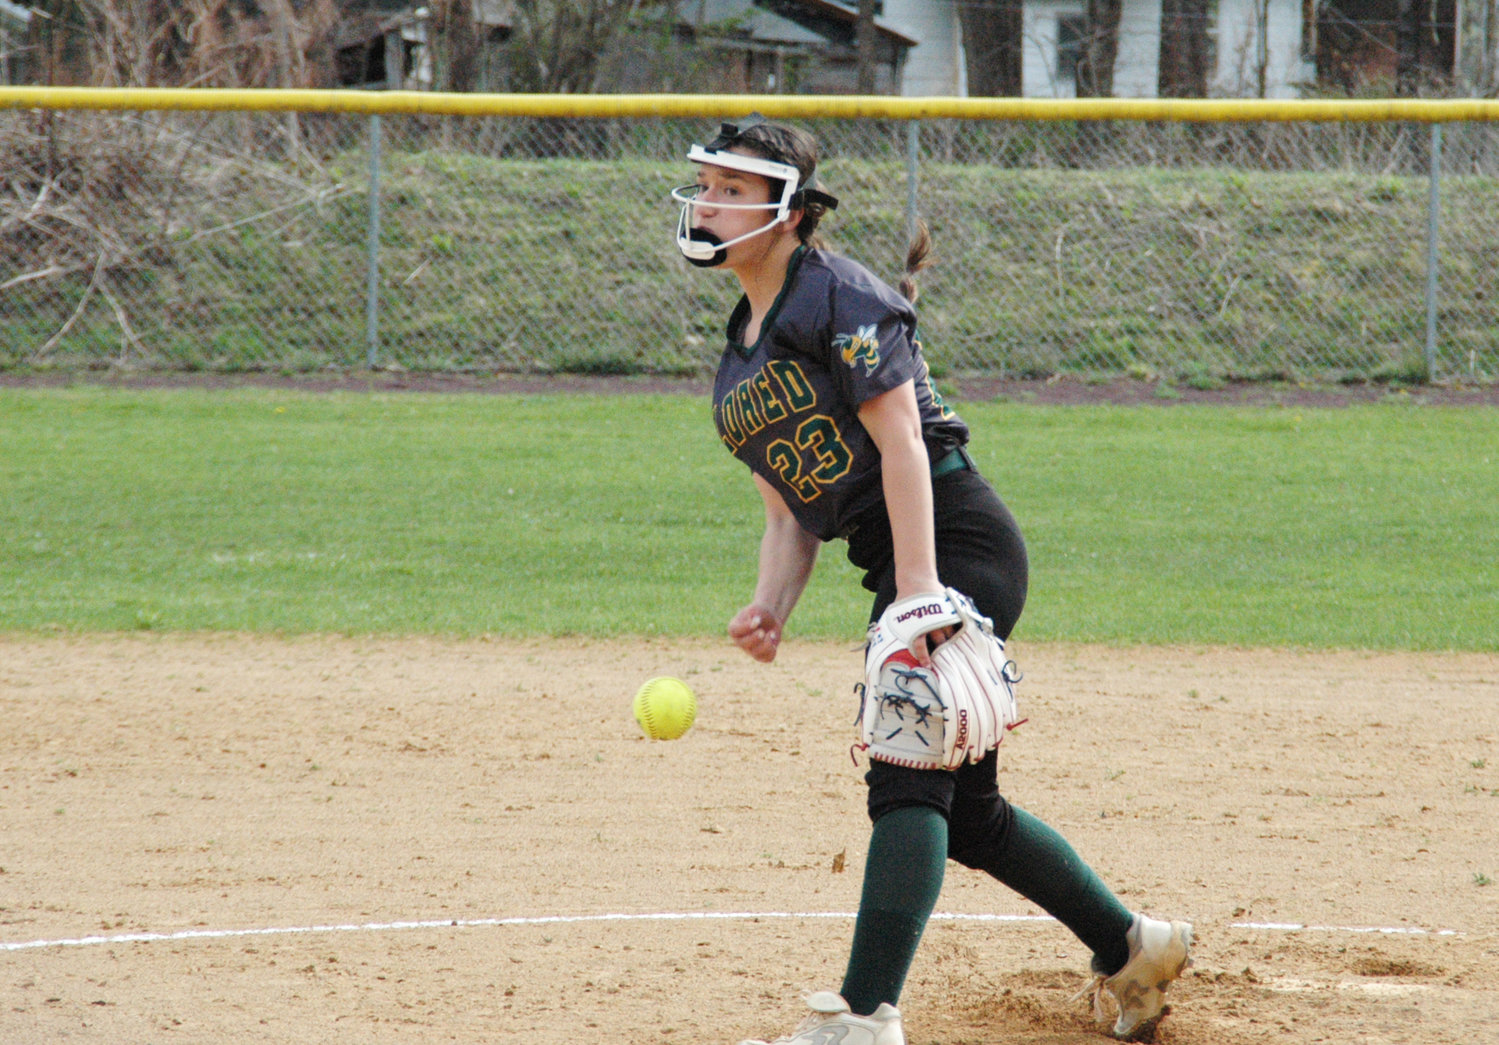 Livingston Manor’s Mackenzie Carlson and Eldred’s Dana Donnelly gave their all in the first meeting between the two teams. Each threw a complete game, fielded their positions, and contributed offensively for their respective teams. Donnelly and the Lady Yellowjackets came out on top in the first meeting, and the rematch was scheduled for yesterday afternoon.